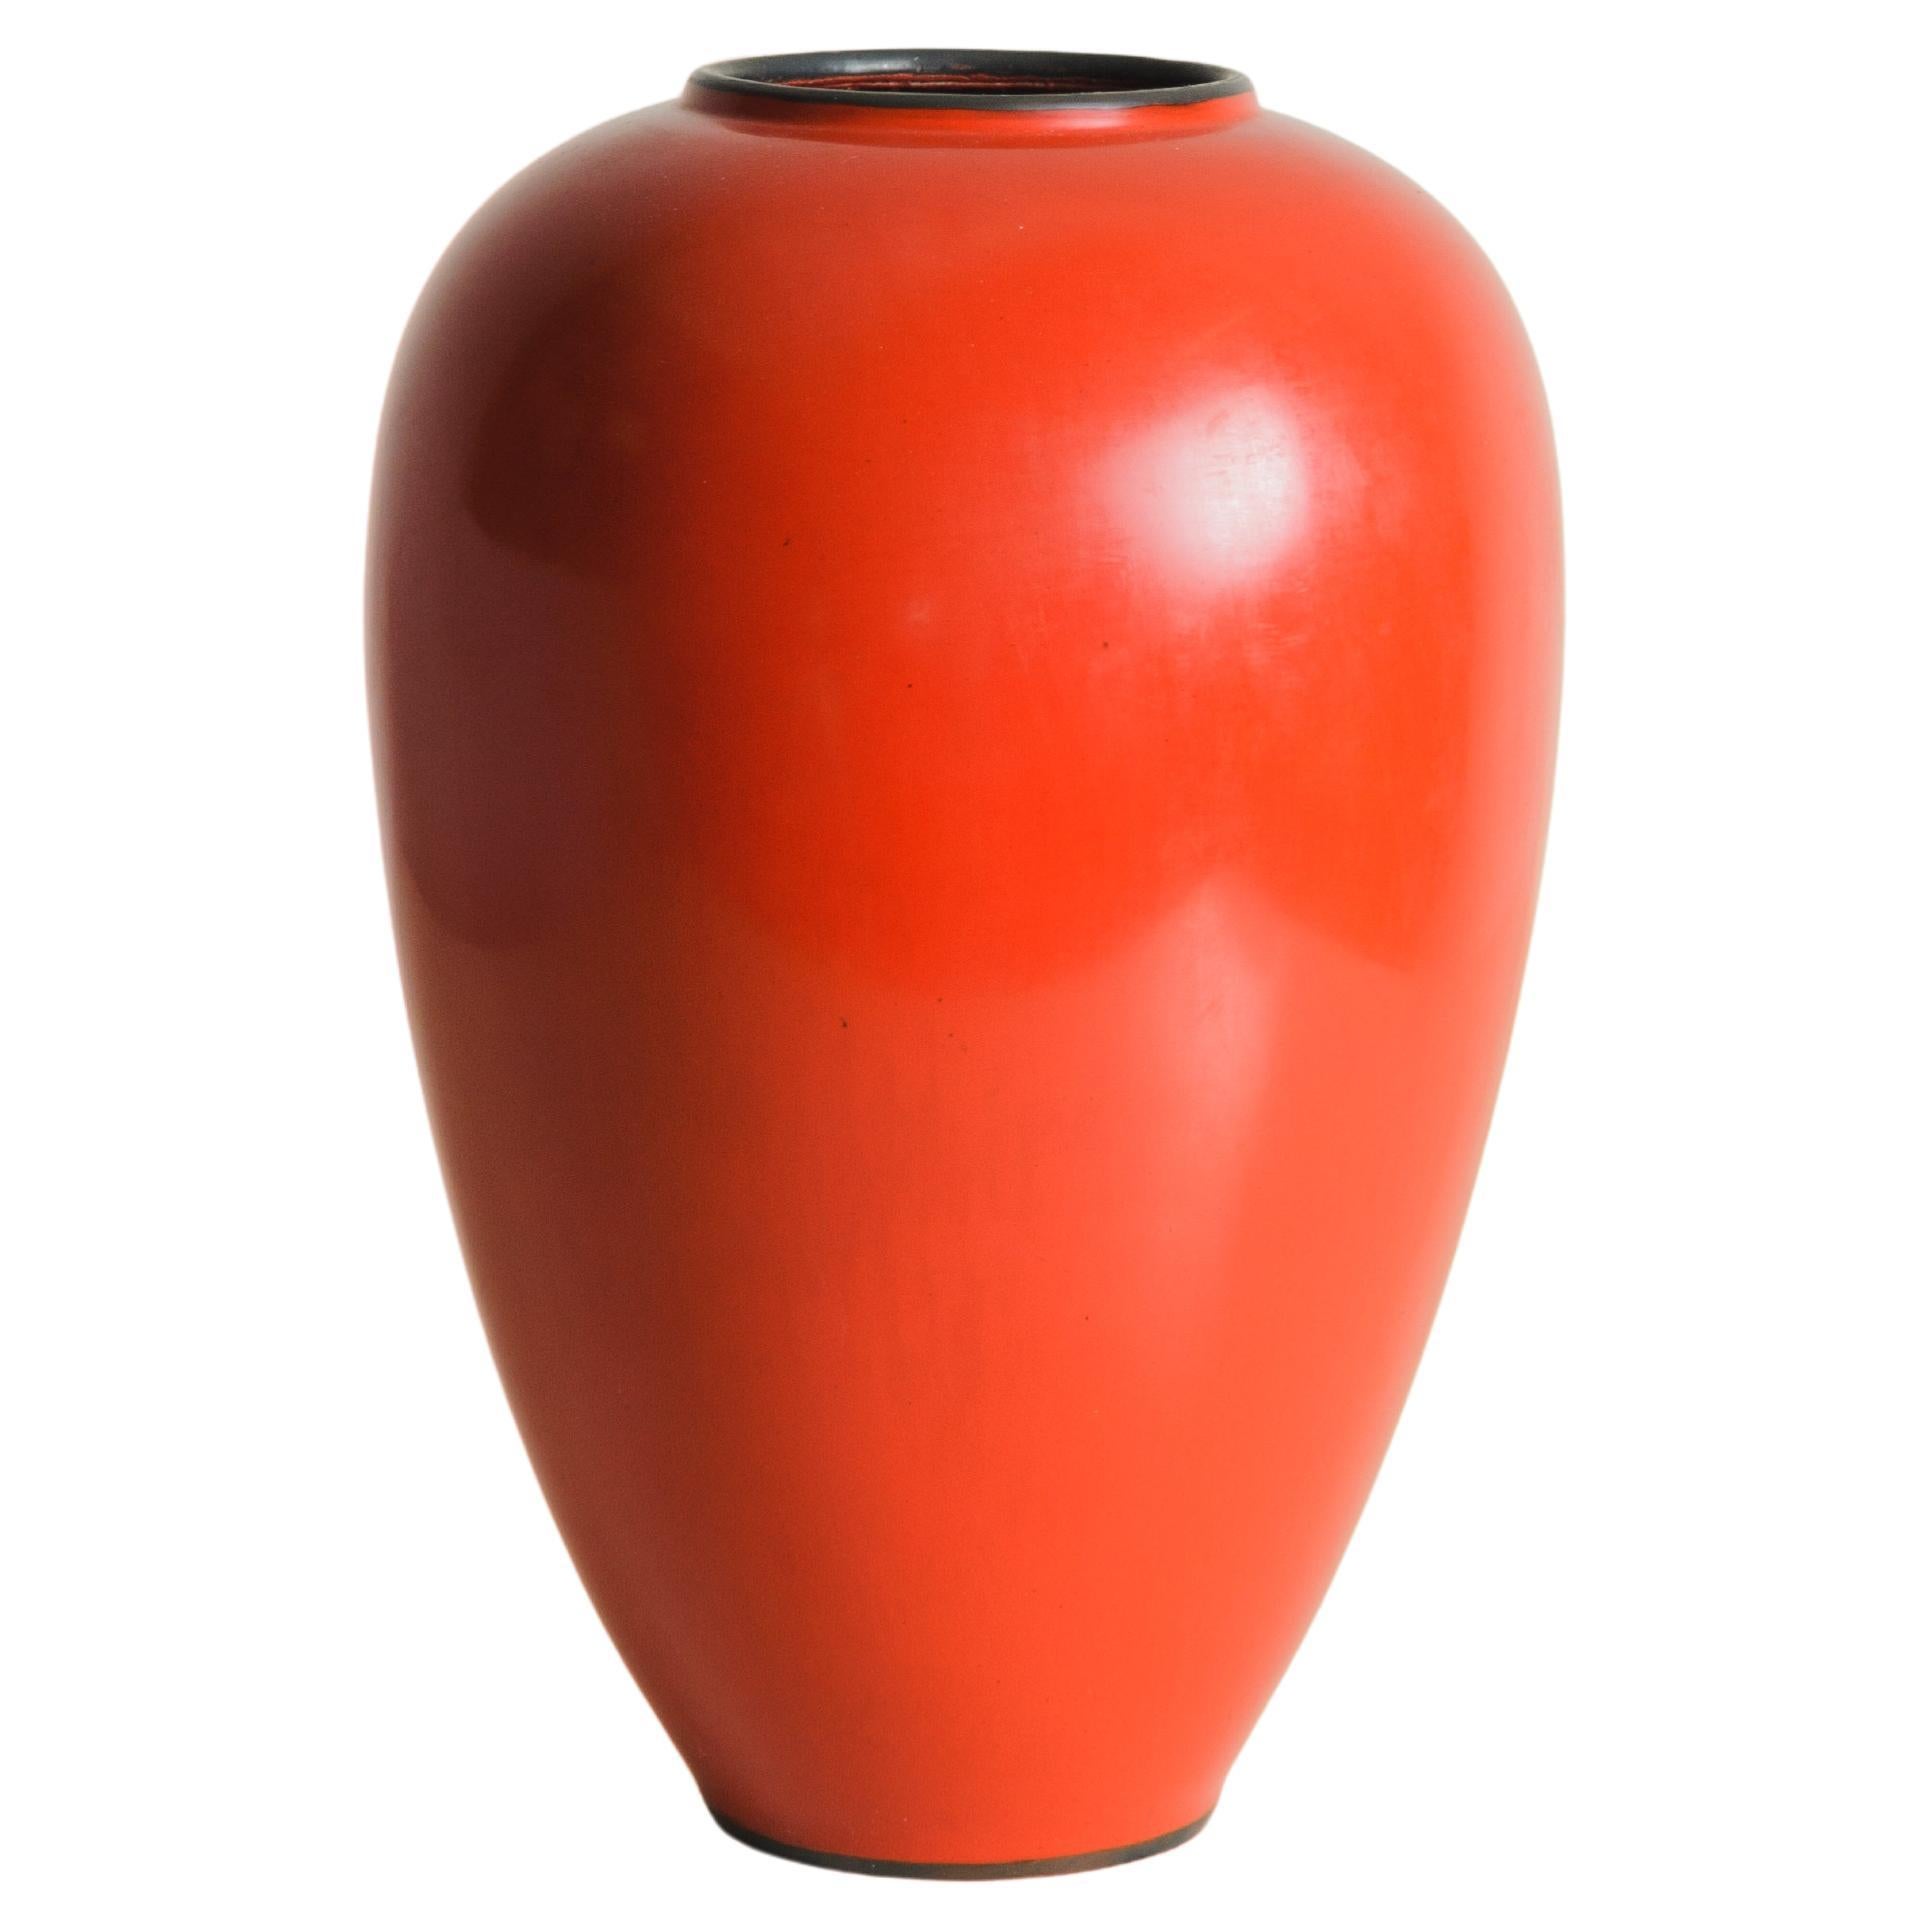 Contemporary Baluster Vase w/ Copper Rim in Red Lacquer by Robert Kuo For Sale